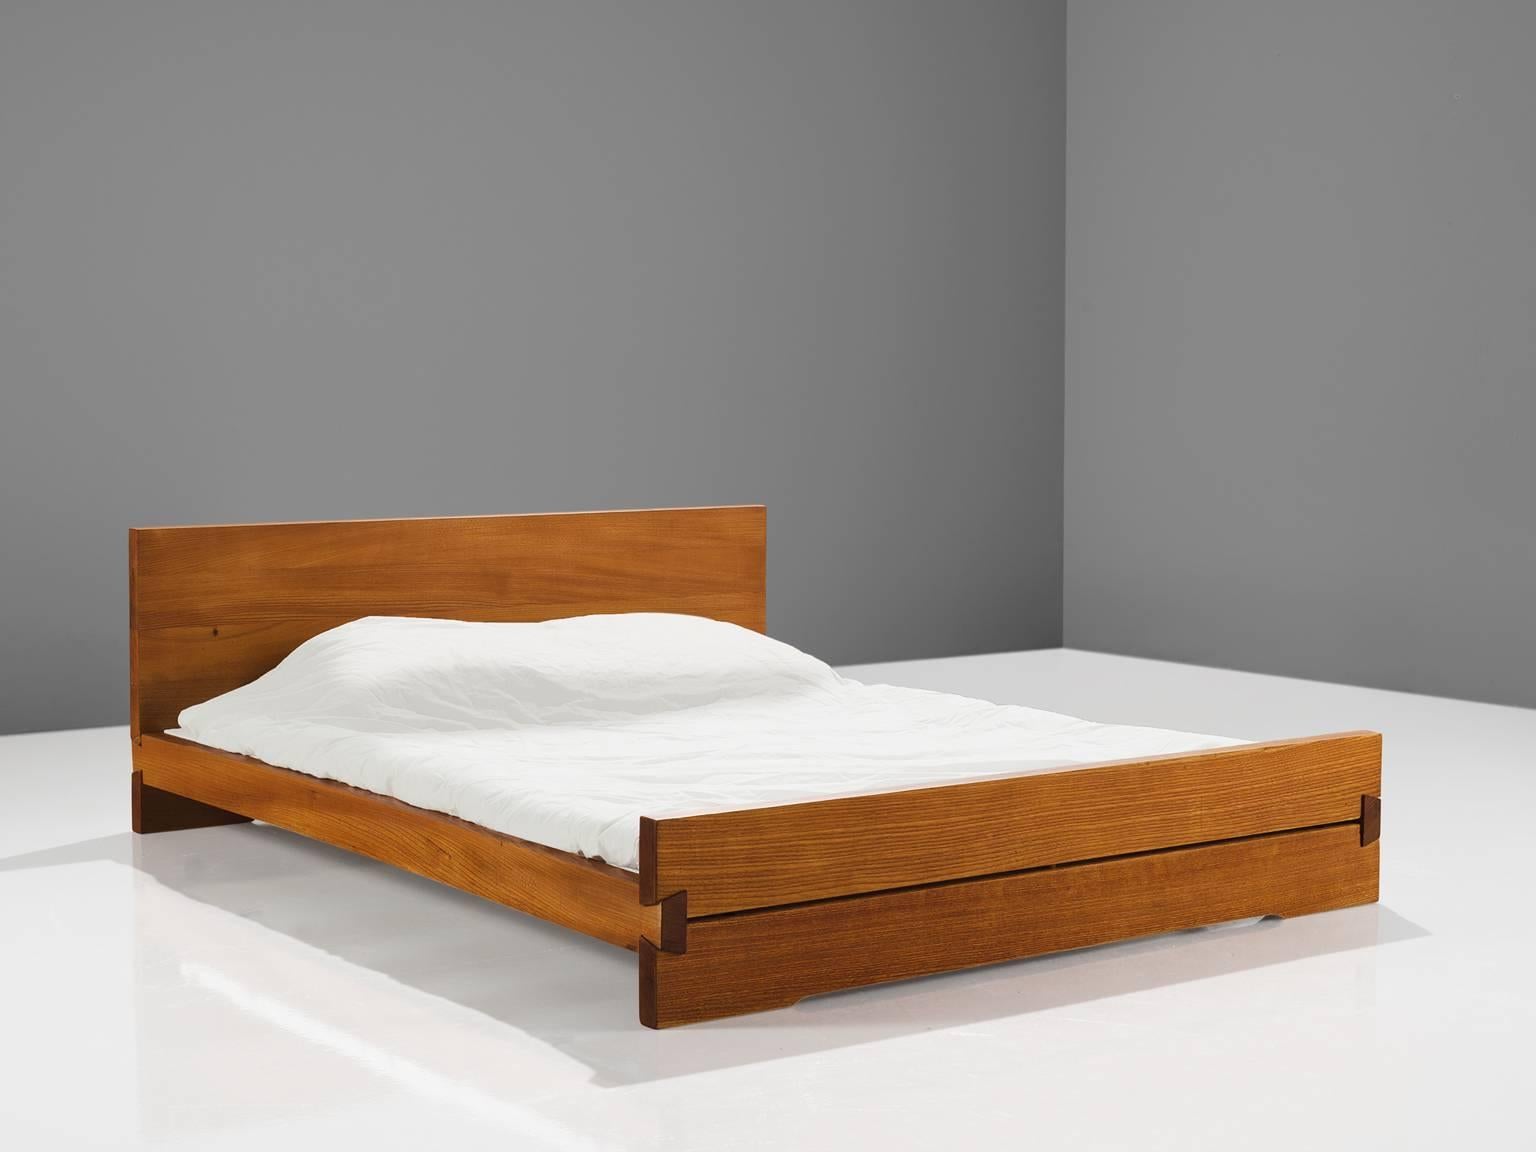 Pierre Chapo, 'Louis' bed L02C, elm, France, 1960s

This bed is designed by Pierre Chapo in the 1960s. The bed features the hand-crafted joints that the woodworker Chapo is known for. The bed holds a tall headboard and a lower foot end. The elm